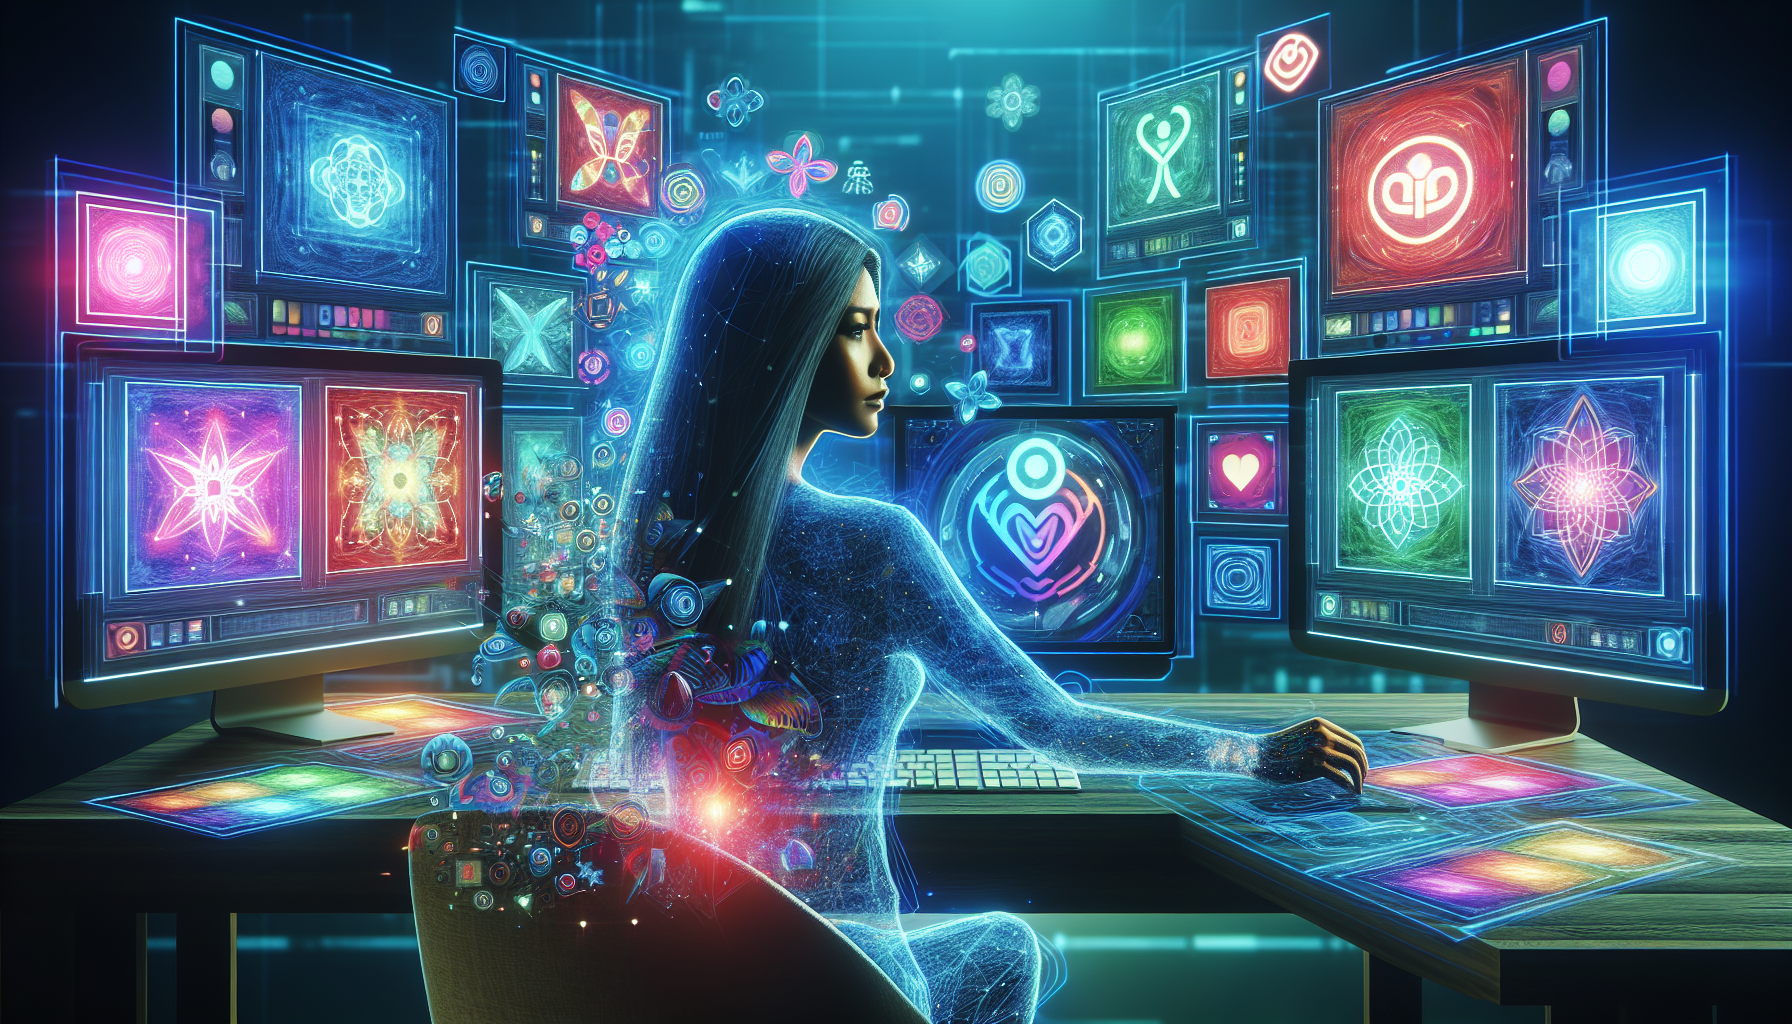 A digital artist sitting at a creative workstation with multiple screens displaying a variety of artistic videos and graphics, surrounded by floating symbols representing AI and technology, with the A